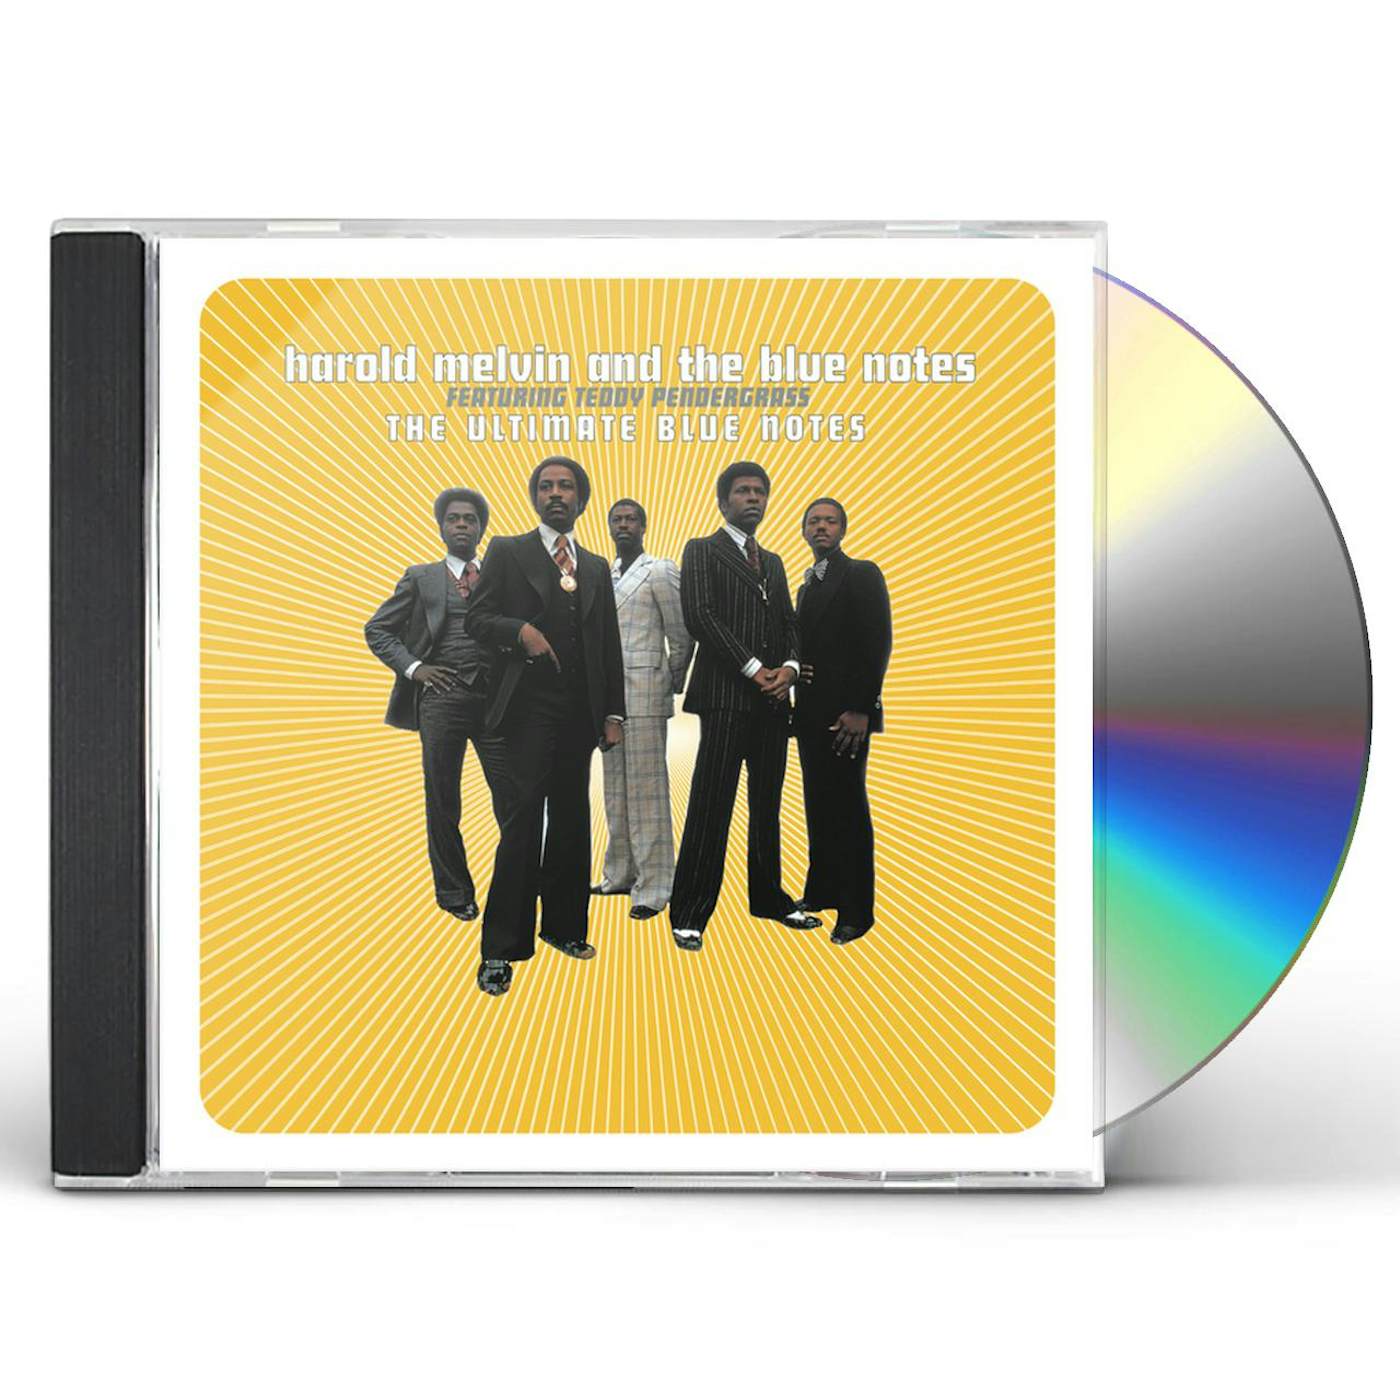 Harold Melvin & The Blue Notes ULTIMATE BLUE NOTES CD